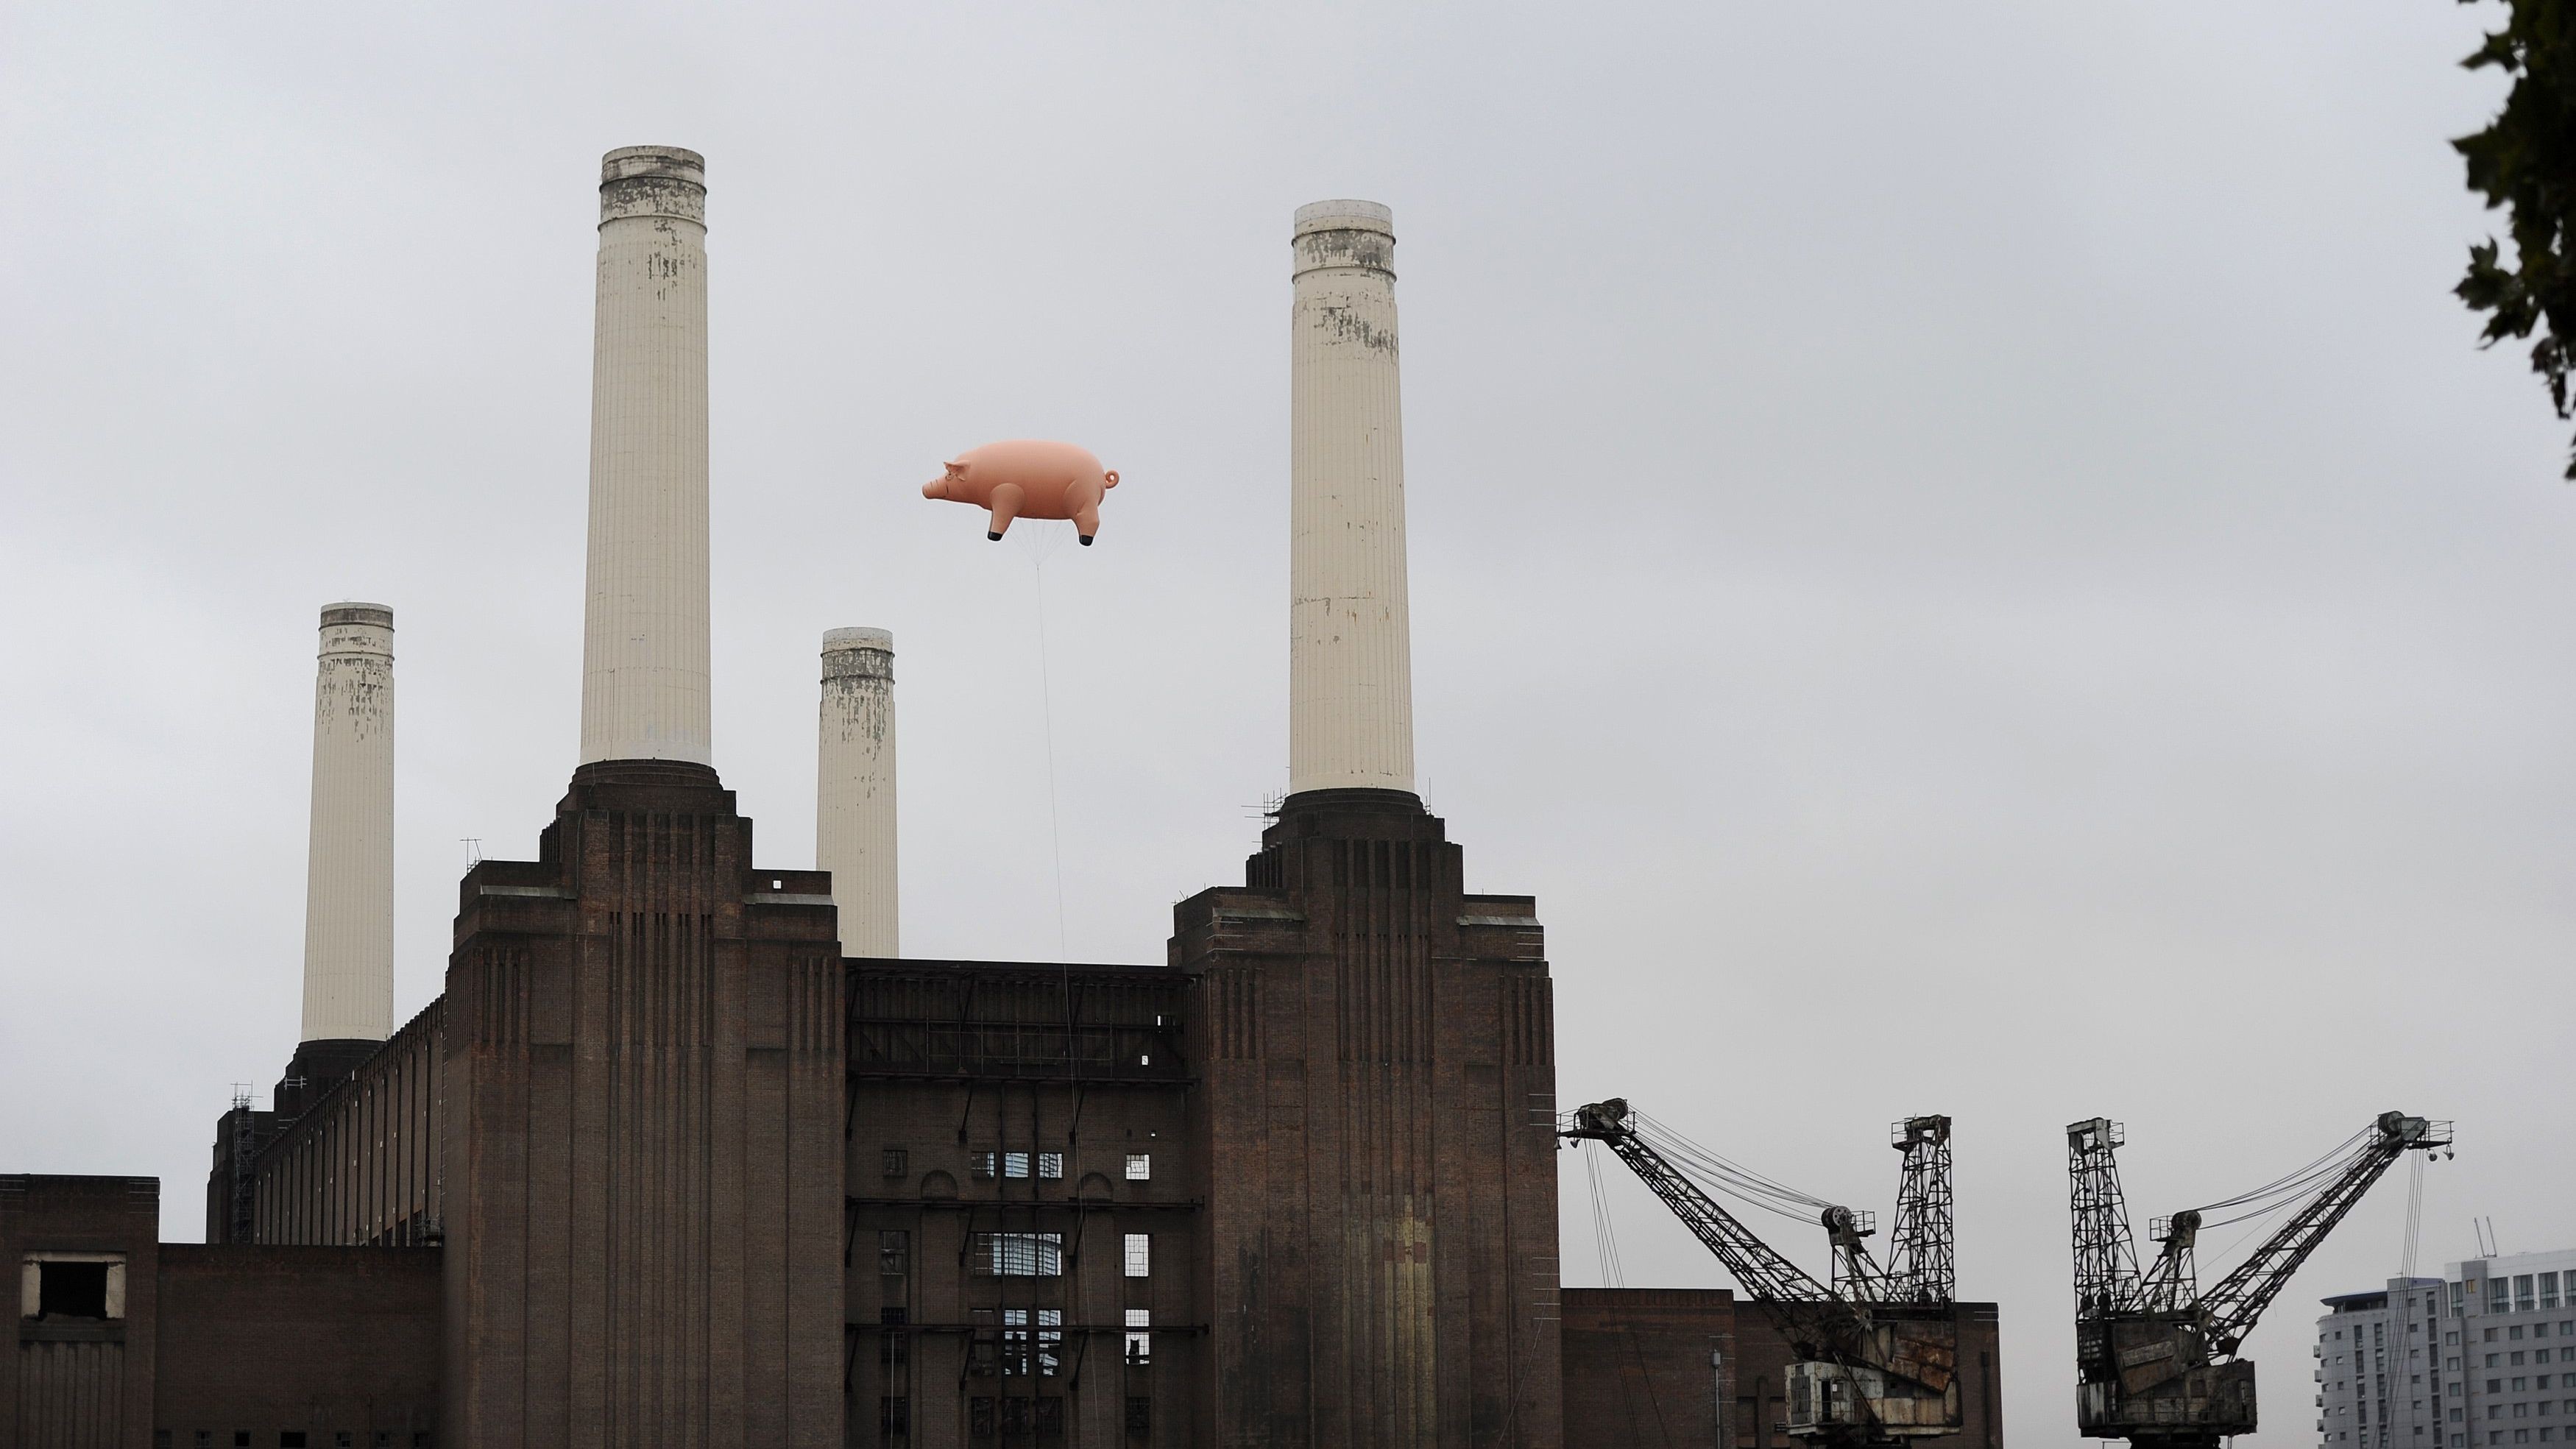 3500x1969 An inflatable pink pig flies above Battersea Power Station in London  September 26, 2011.